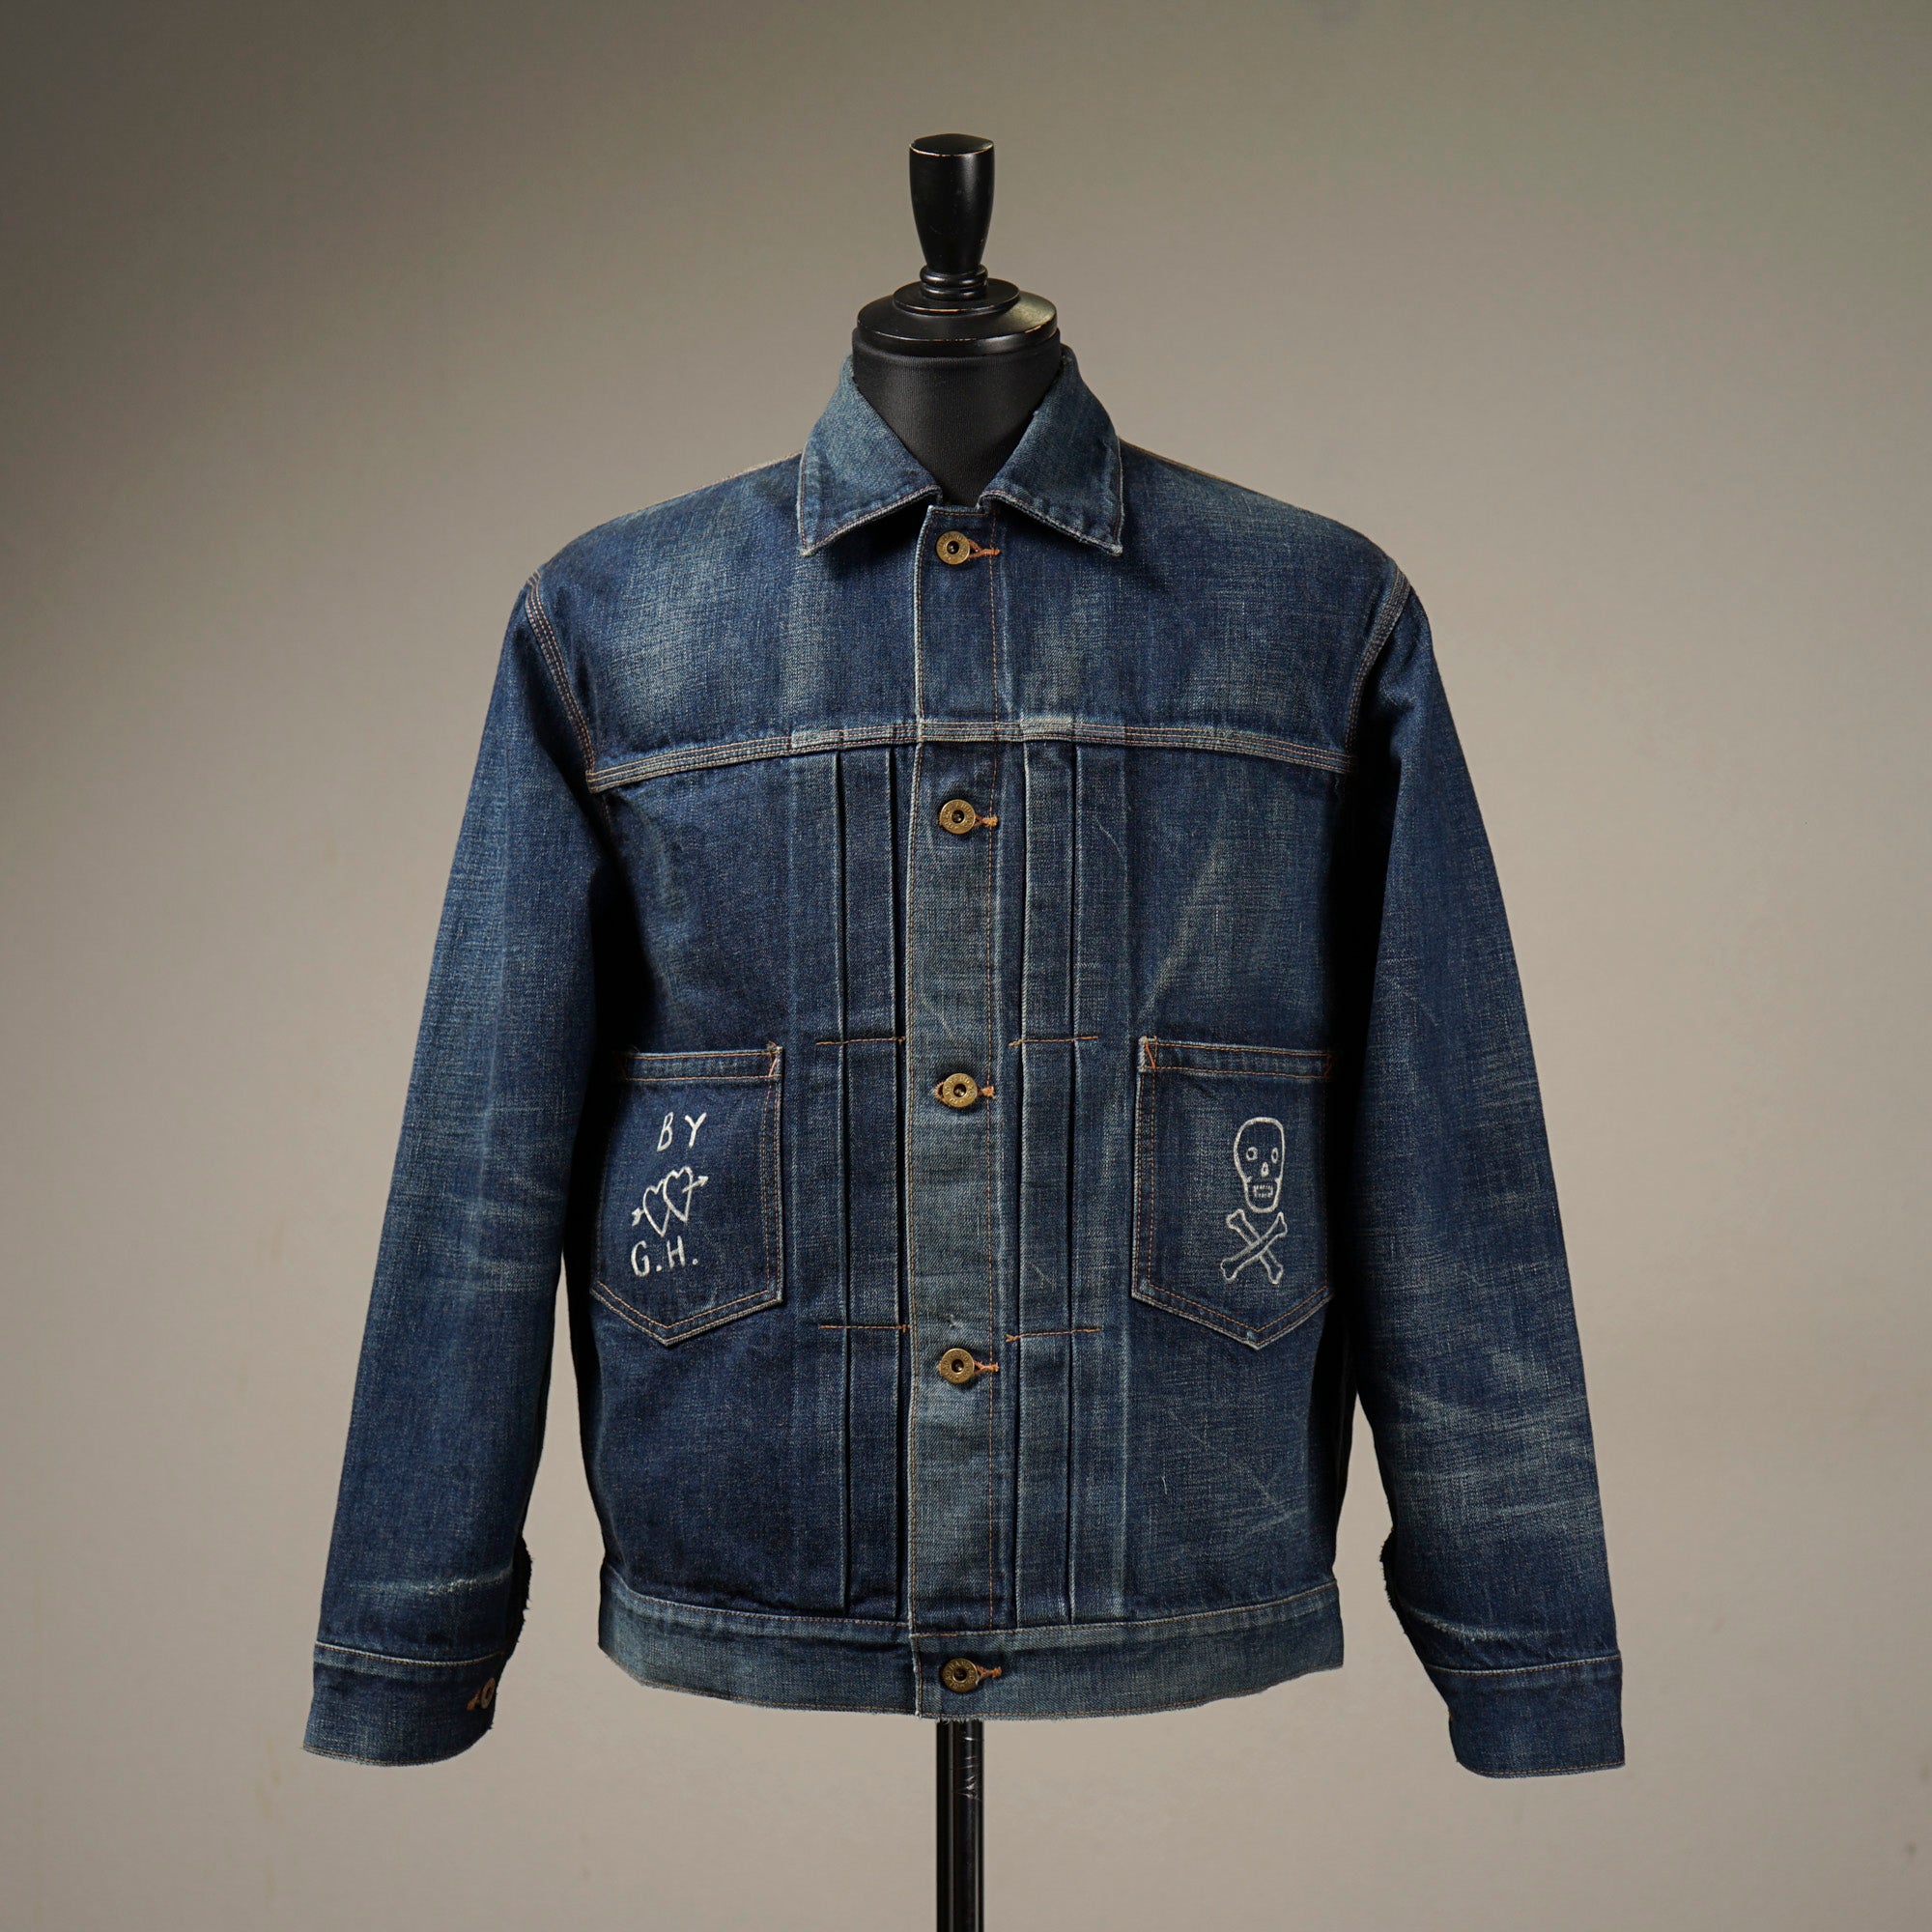 LIZZY - DENIM JACKET HAND PAINT / BYGH-23-AW-10